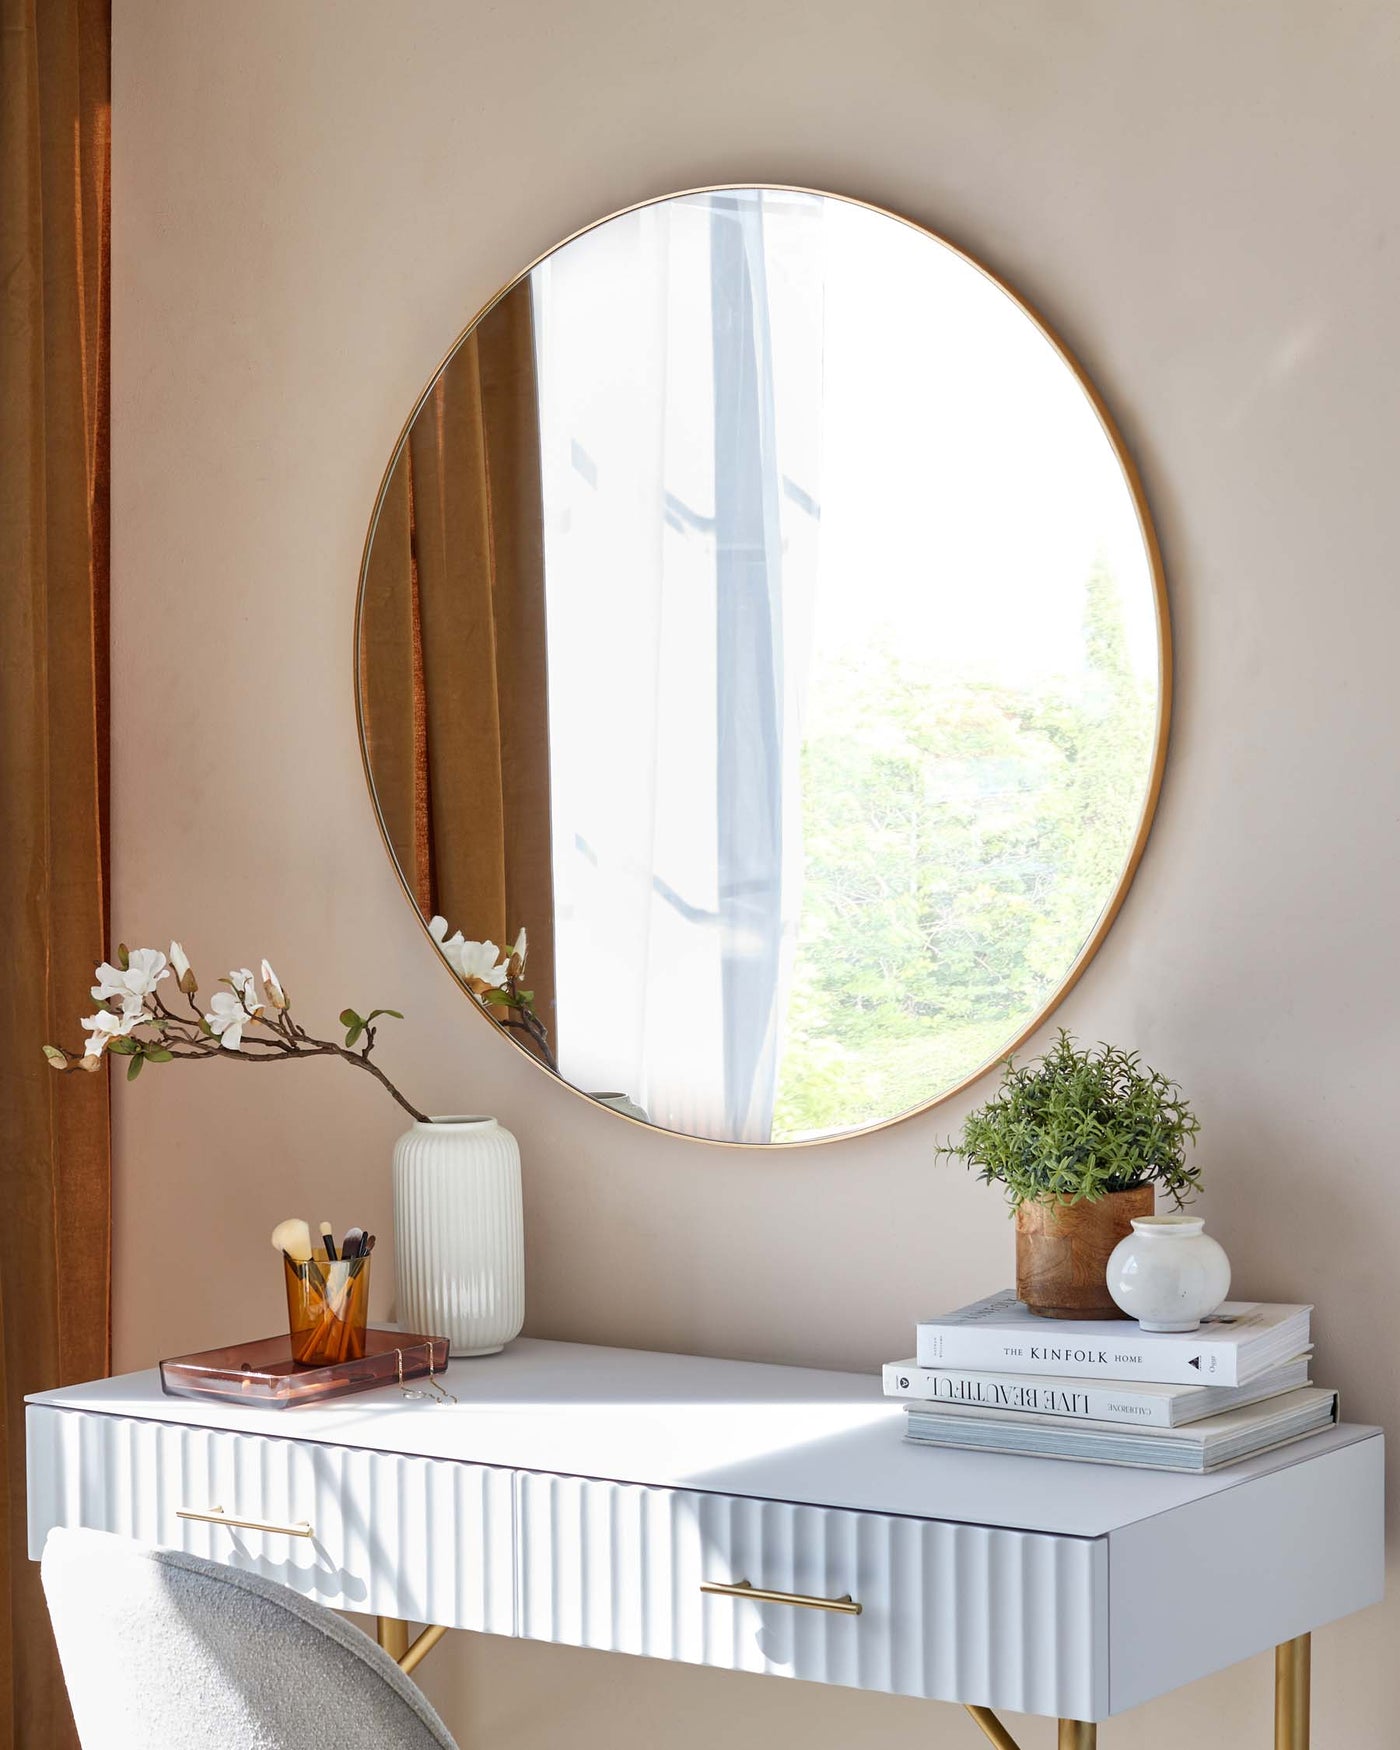 Elegant modern console table with a white grooved front, featuring gold handles, paired with a minimalist round wall mirror with a bronze frame.